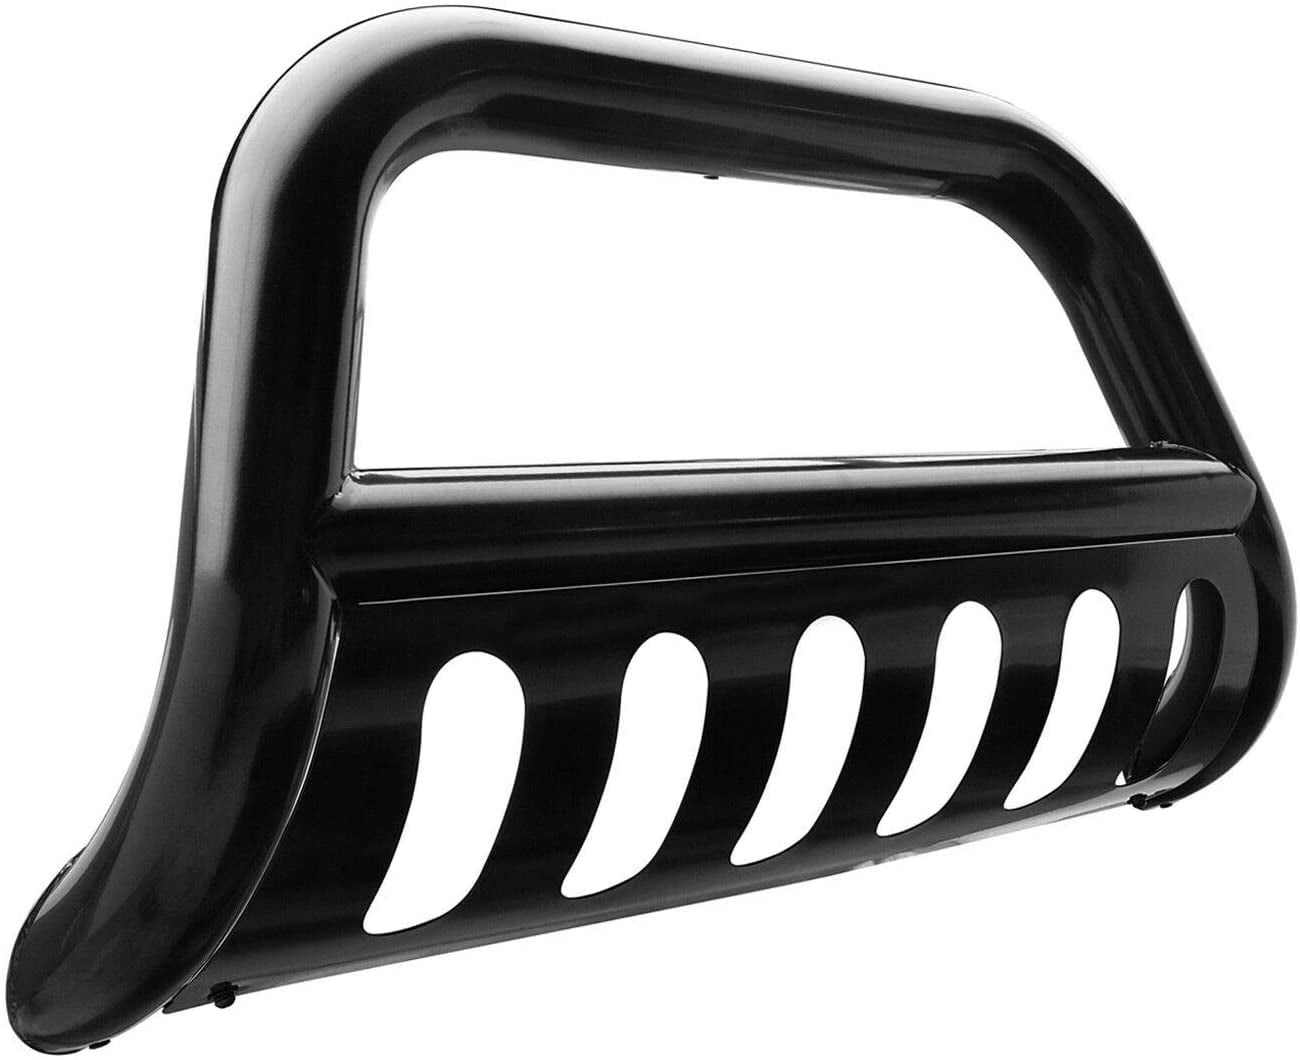 TAC Bull Bar Compatible with 2010-2018 Jeep Wrangler JK SUV 3” Black Front Bumper Grille Guard Brush Guard Off Road Accessories 